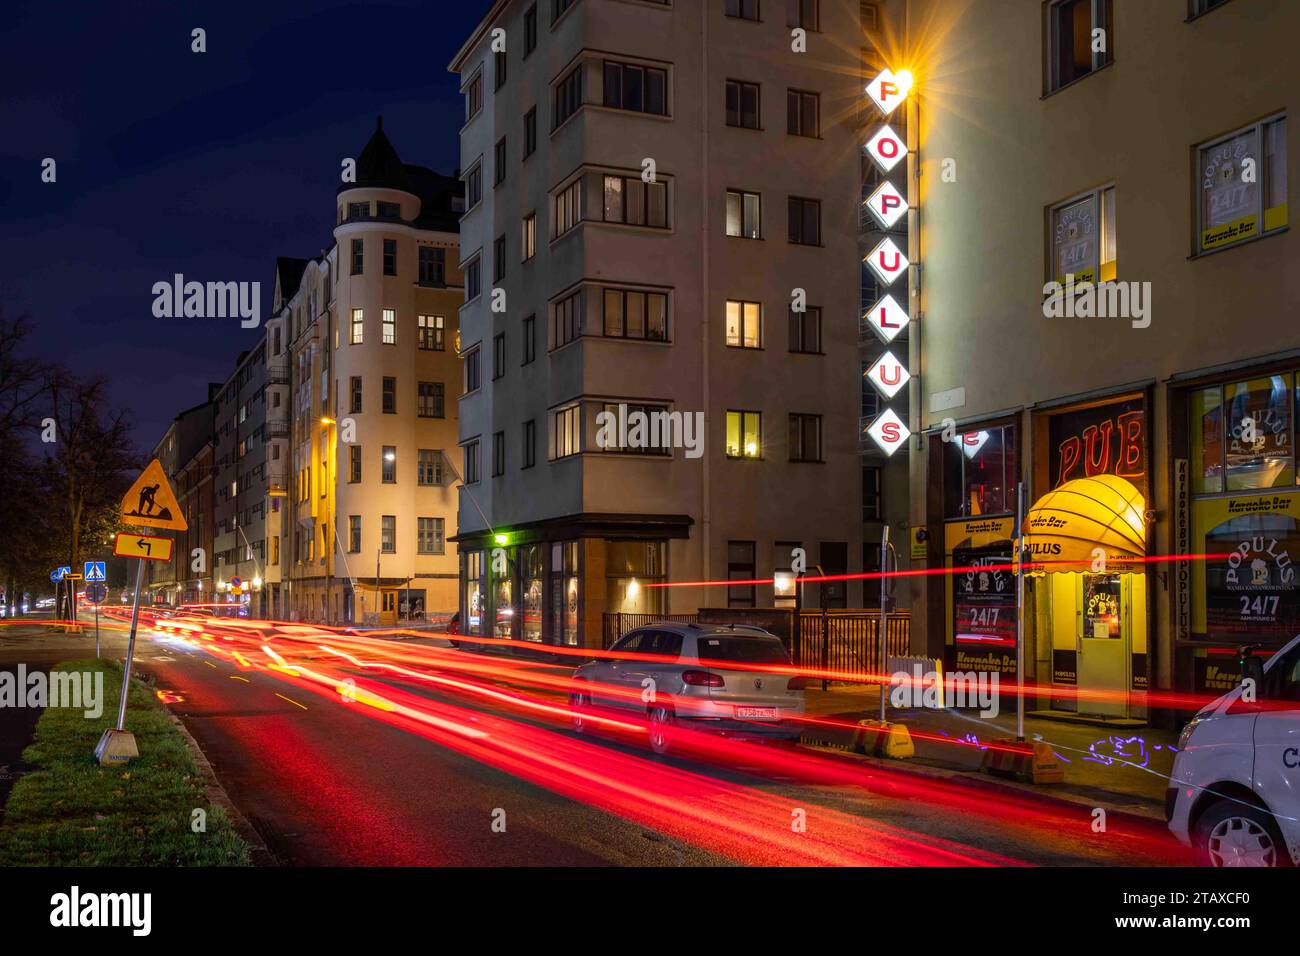 Aleksis Kiven katu long exposure street view with light trails and Populus channel letters or light up letters in Harju district of Helsinki, Finland Stock Photo